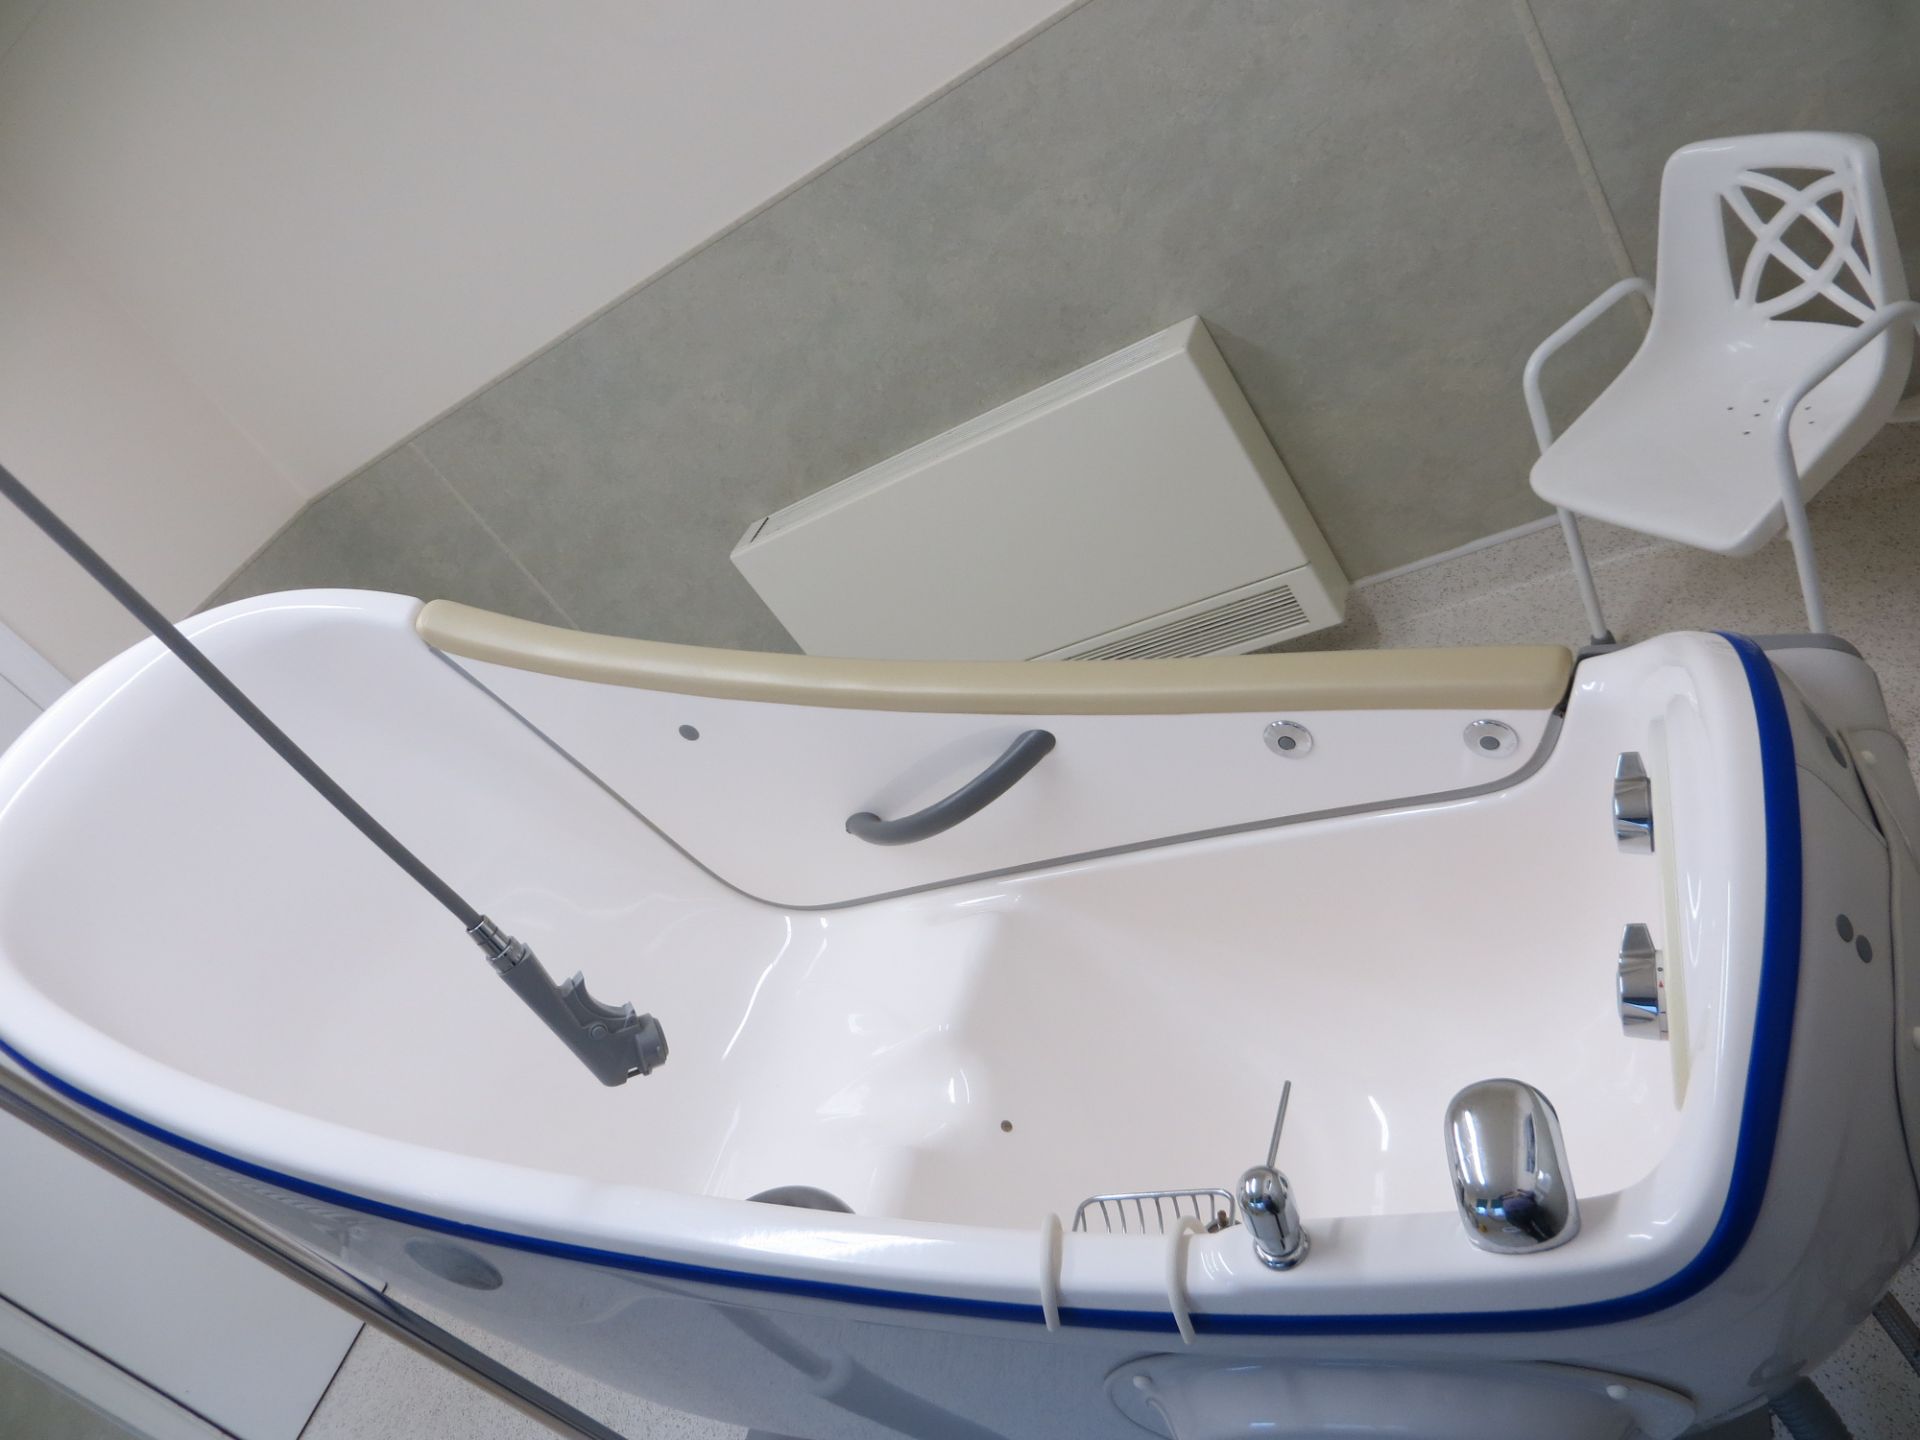 Arjo Parker 420 assisted bath with shower 410kg capacity model ALXXXXX-GB Prod No AL11510-GB s/n - Image 2 of 5